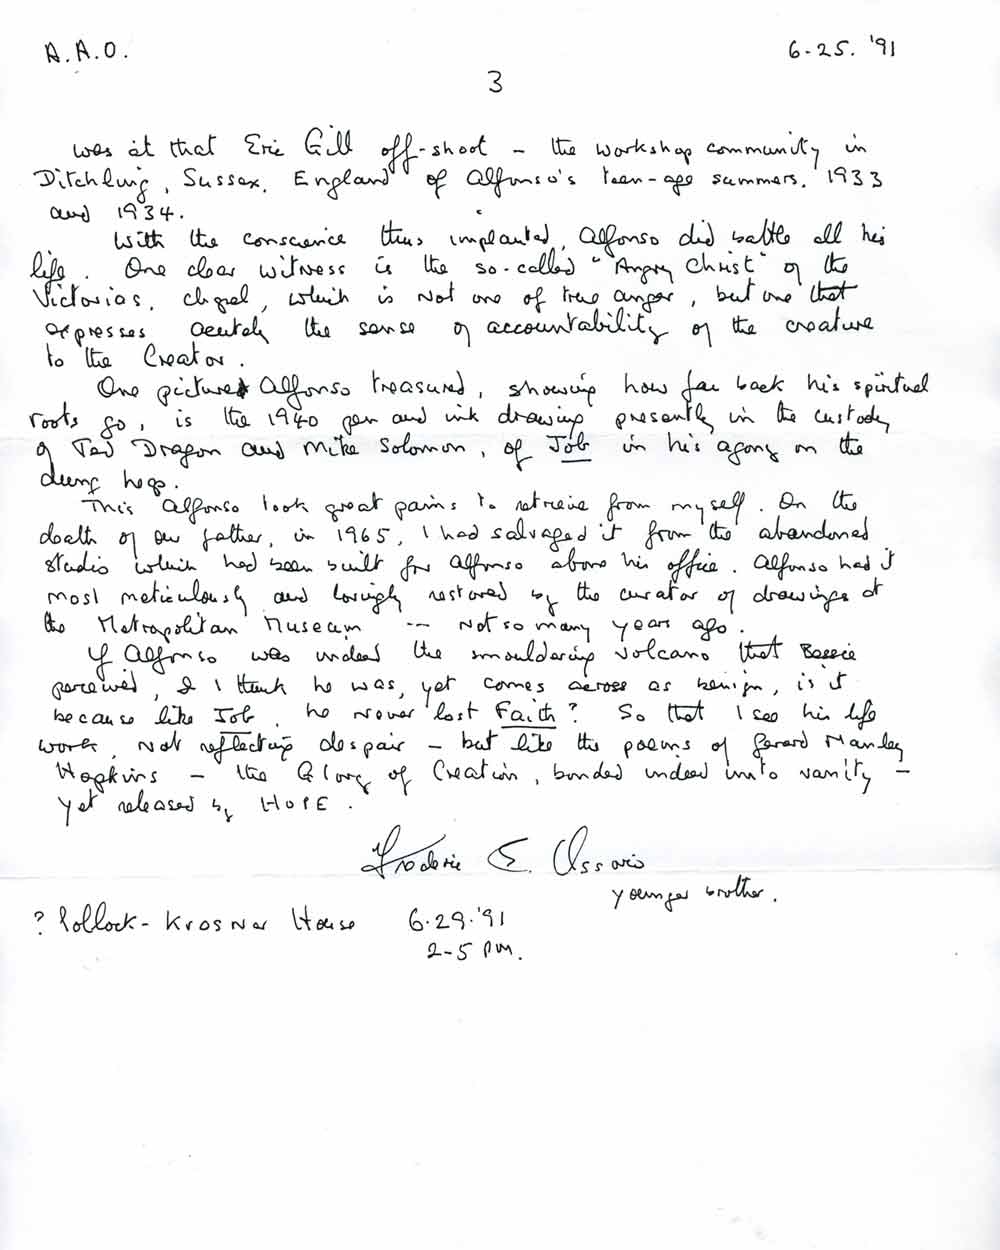 Letter from Frederic E. Ossorio to Robert Lee, pg 3